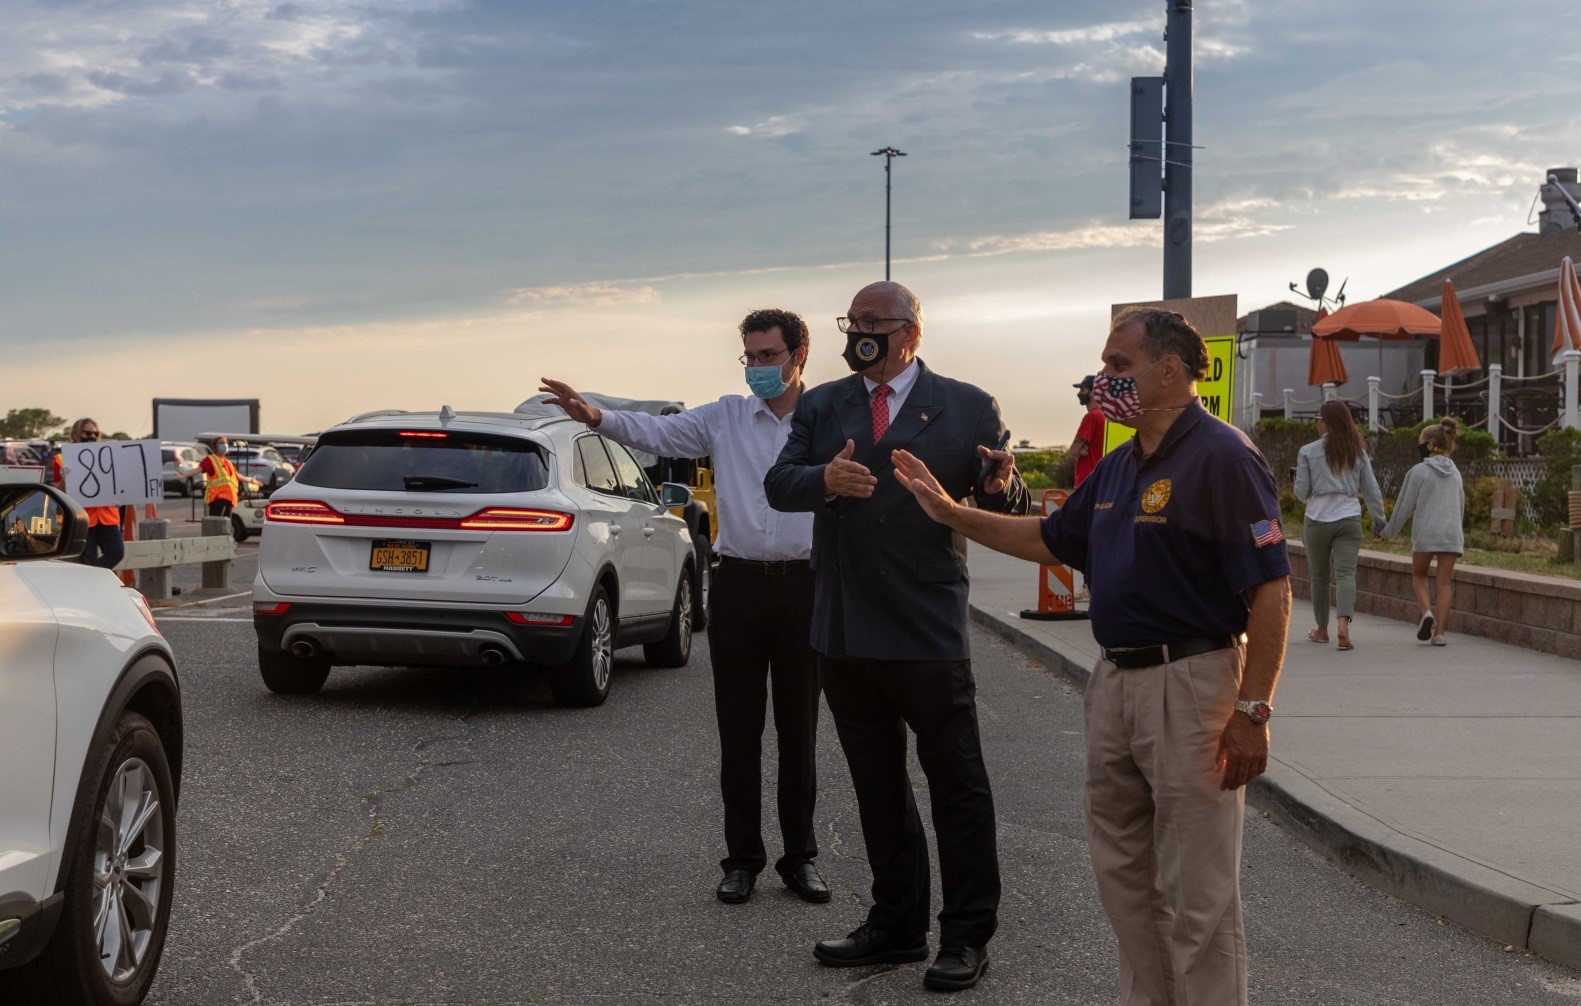 Assemblyman John Mikulin (R,C,I-Bethpage) joined Town of Hempstead Councilman Dennis Dunne, and Town of Oyster Bay Supervisor Joseph Saladino to support the Town of Oyster Bay drive-in movie event on Thursday, June 25 at Tobay Beach.